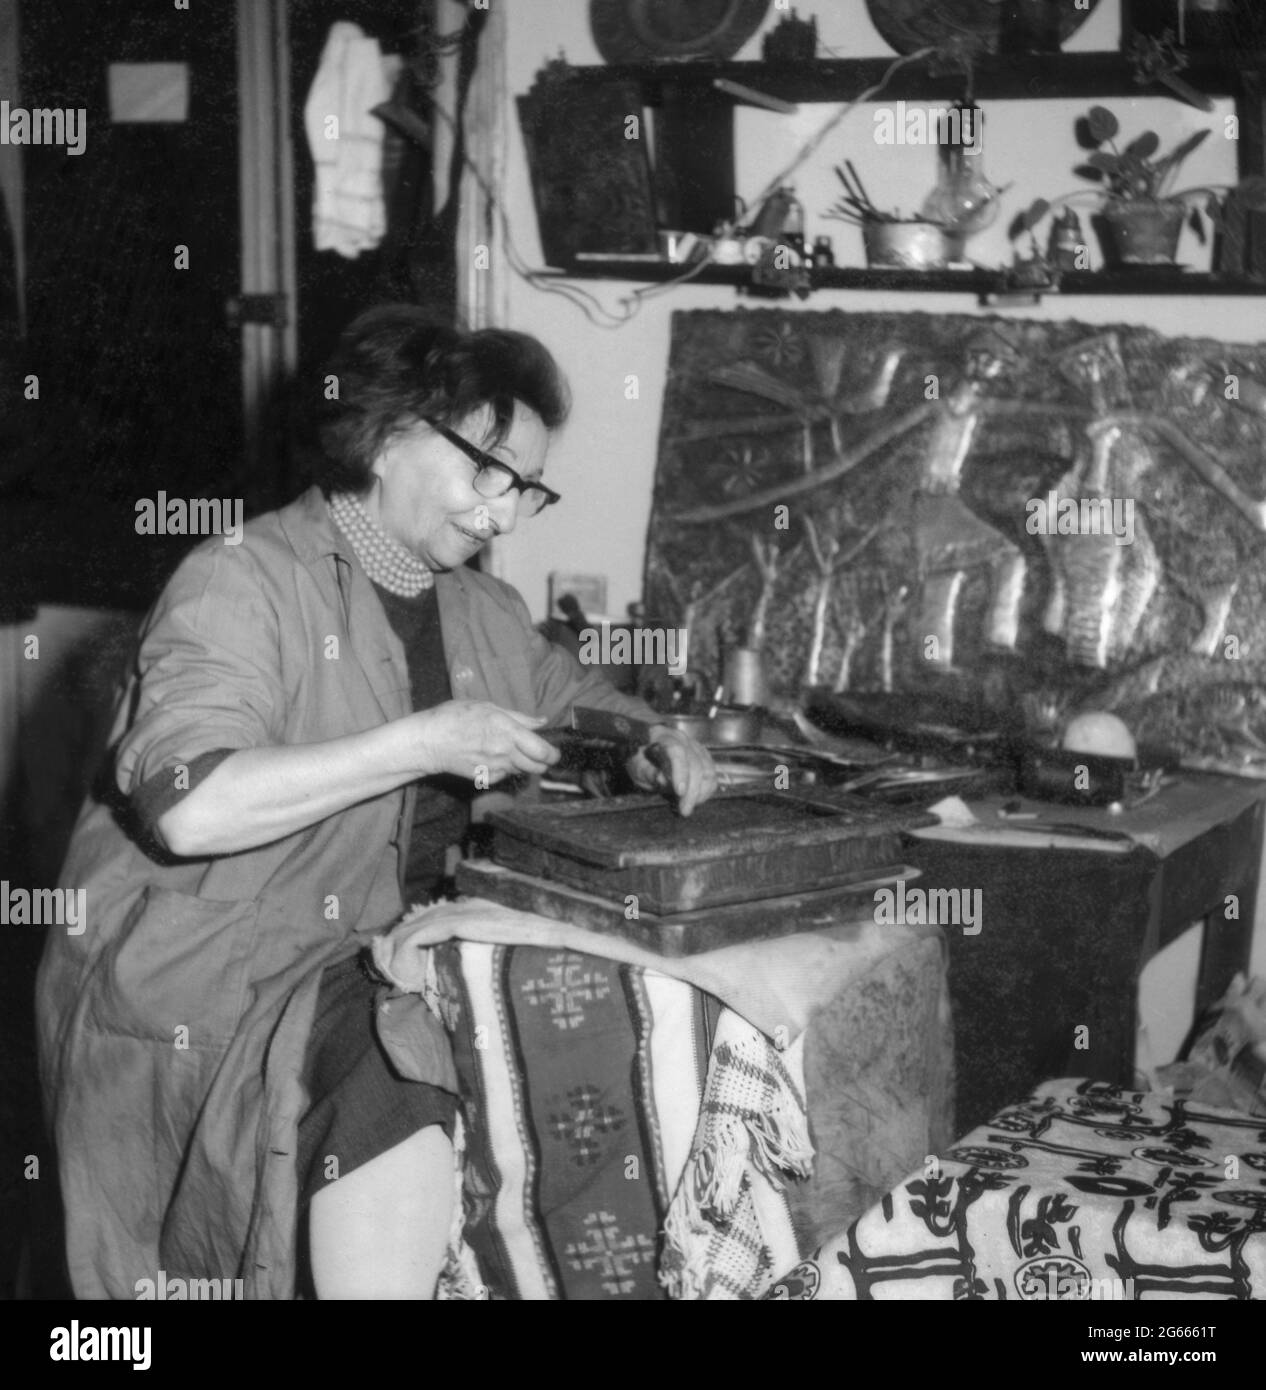 Bucharest, Romania, approx. 1975. Ana Mitrea, well known metal-smith artist in her workshop. Stock Photo